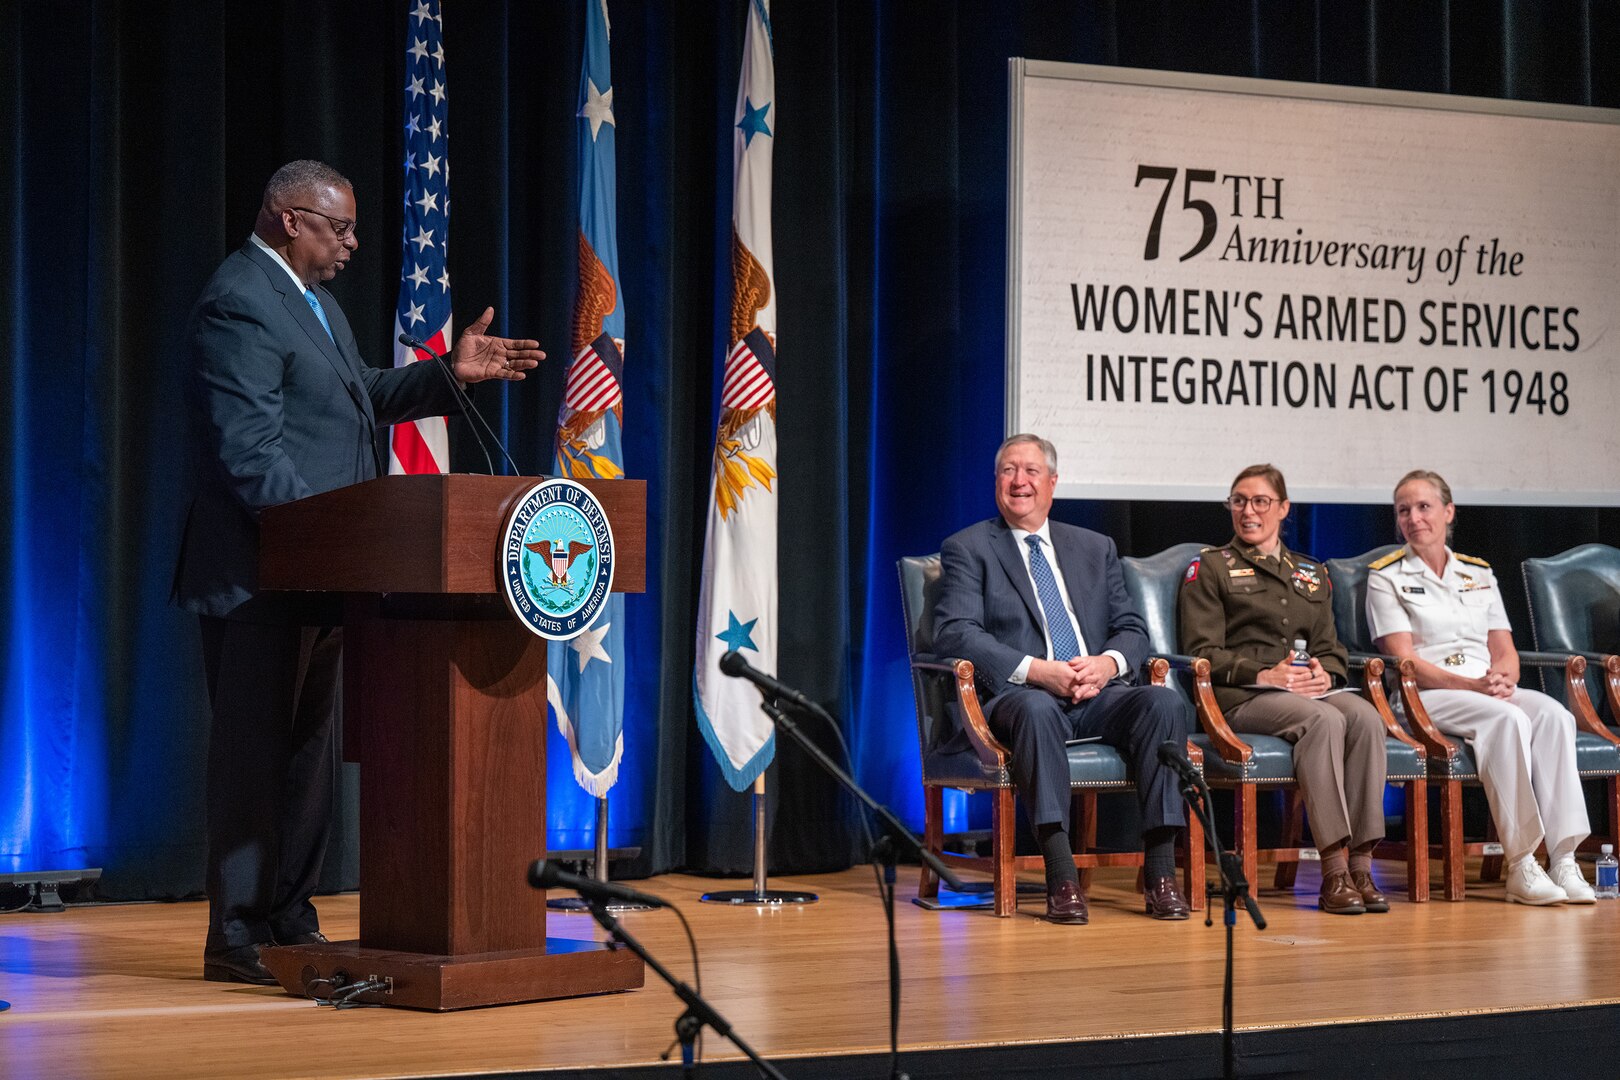 Secretary of Defense Lloyd J. Austin III stands and speaks at a lectern on stage as others seated nearby look on.